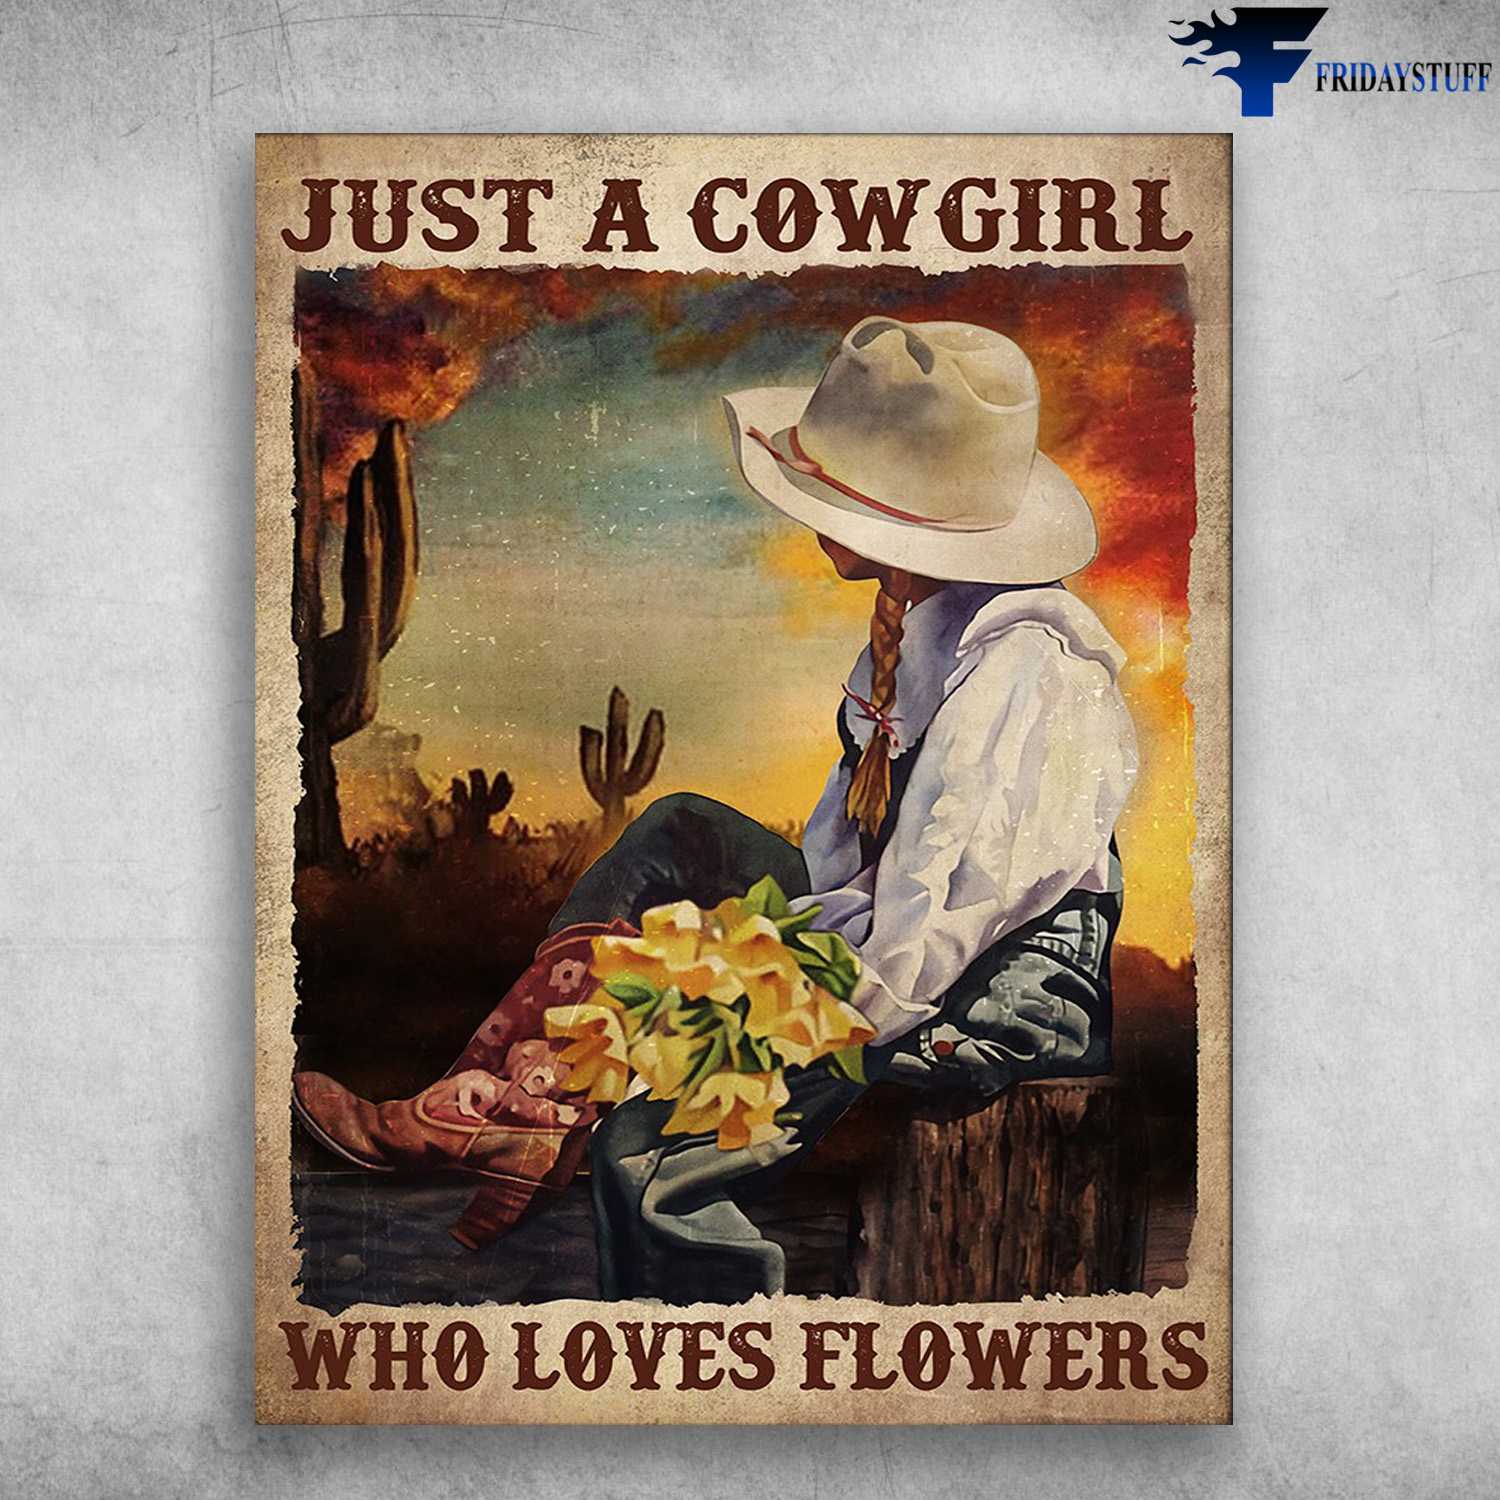 https://fridaystuff.com/wp-content/uploads/2021/10/Cowgirl-Poster-Flower-Lover-Just-A-Cowgirl-Who-Loves-Flowers.jpg